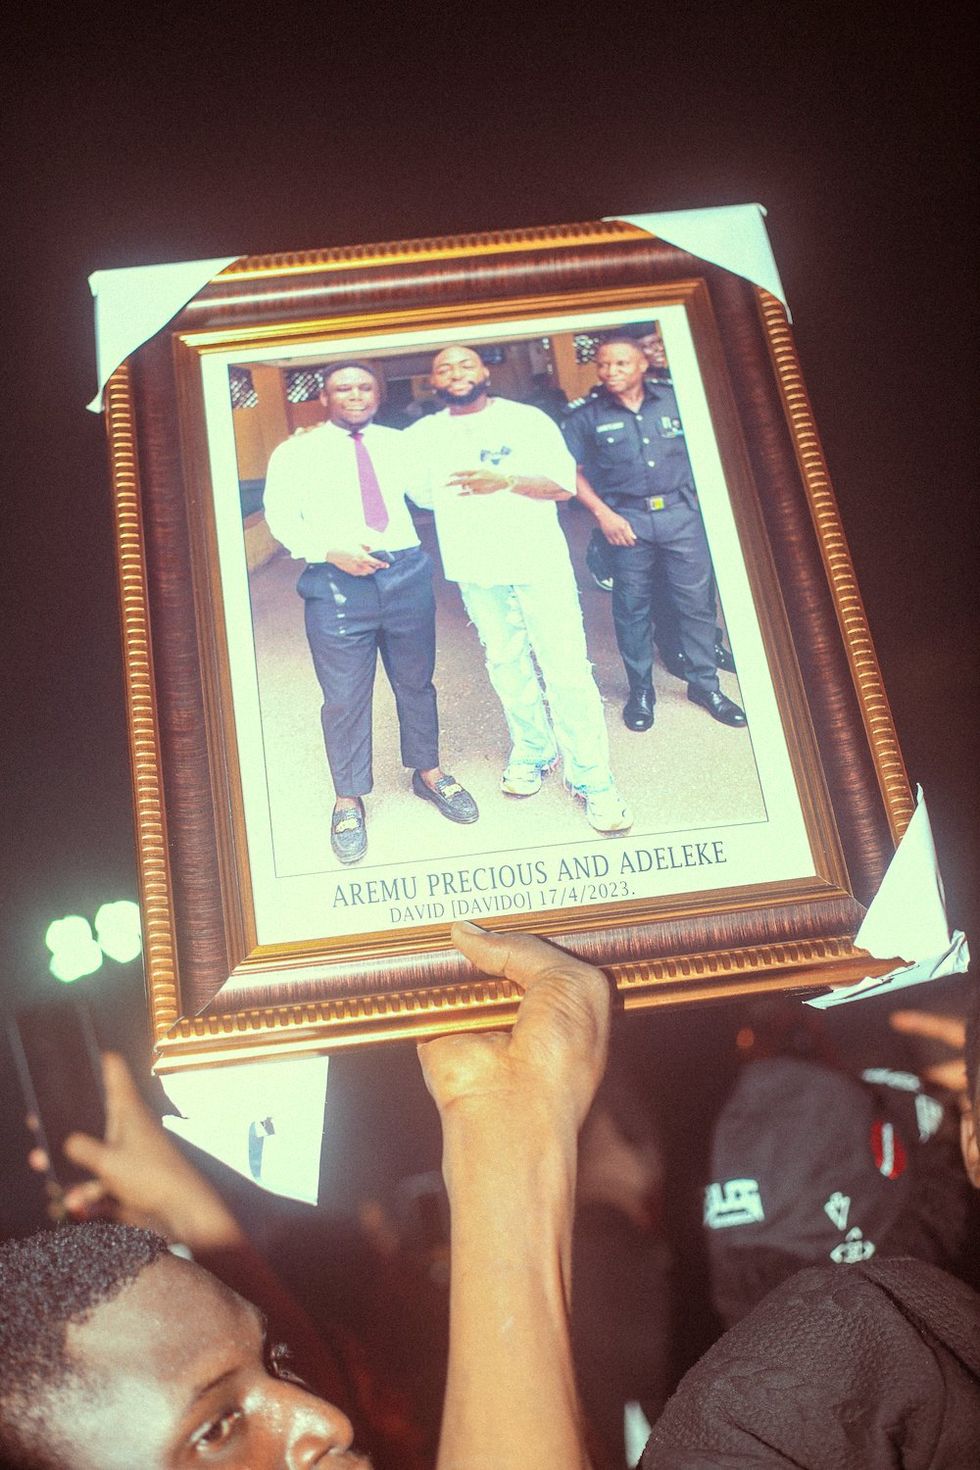 u200bA man (Aremu Precious) holds a framed picture of himself and Davido at the concert.